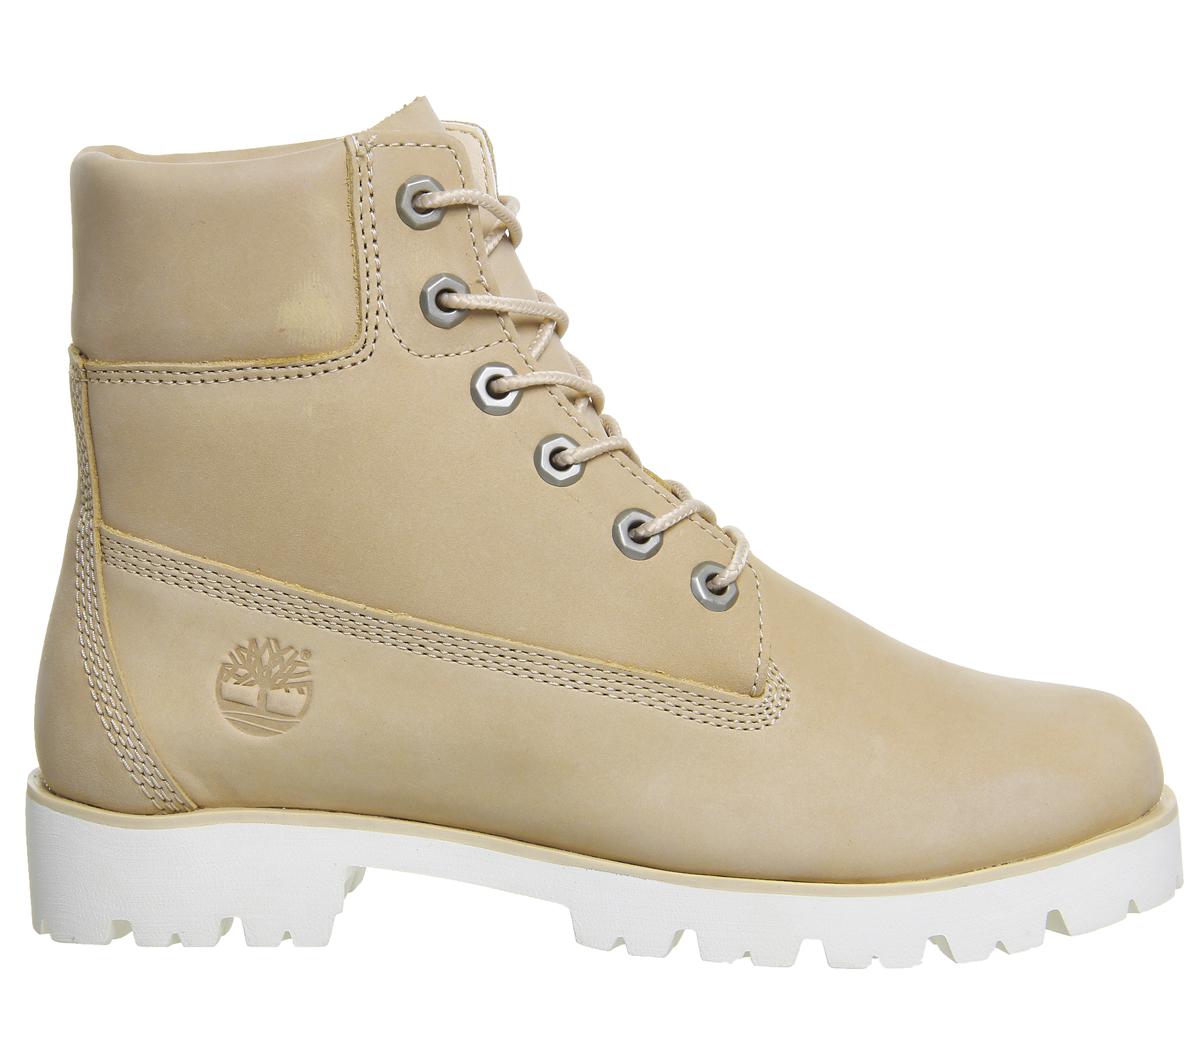 Timberland Rubber Heritage 6 Lite Boot in Natural - Lyst